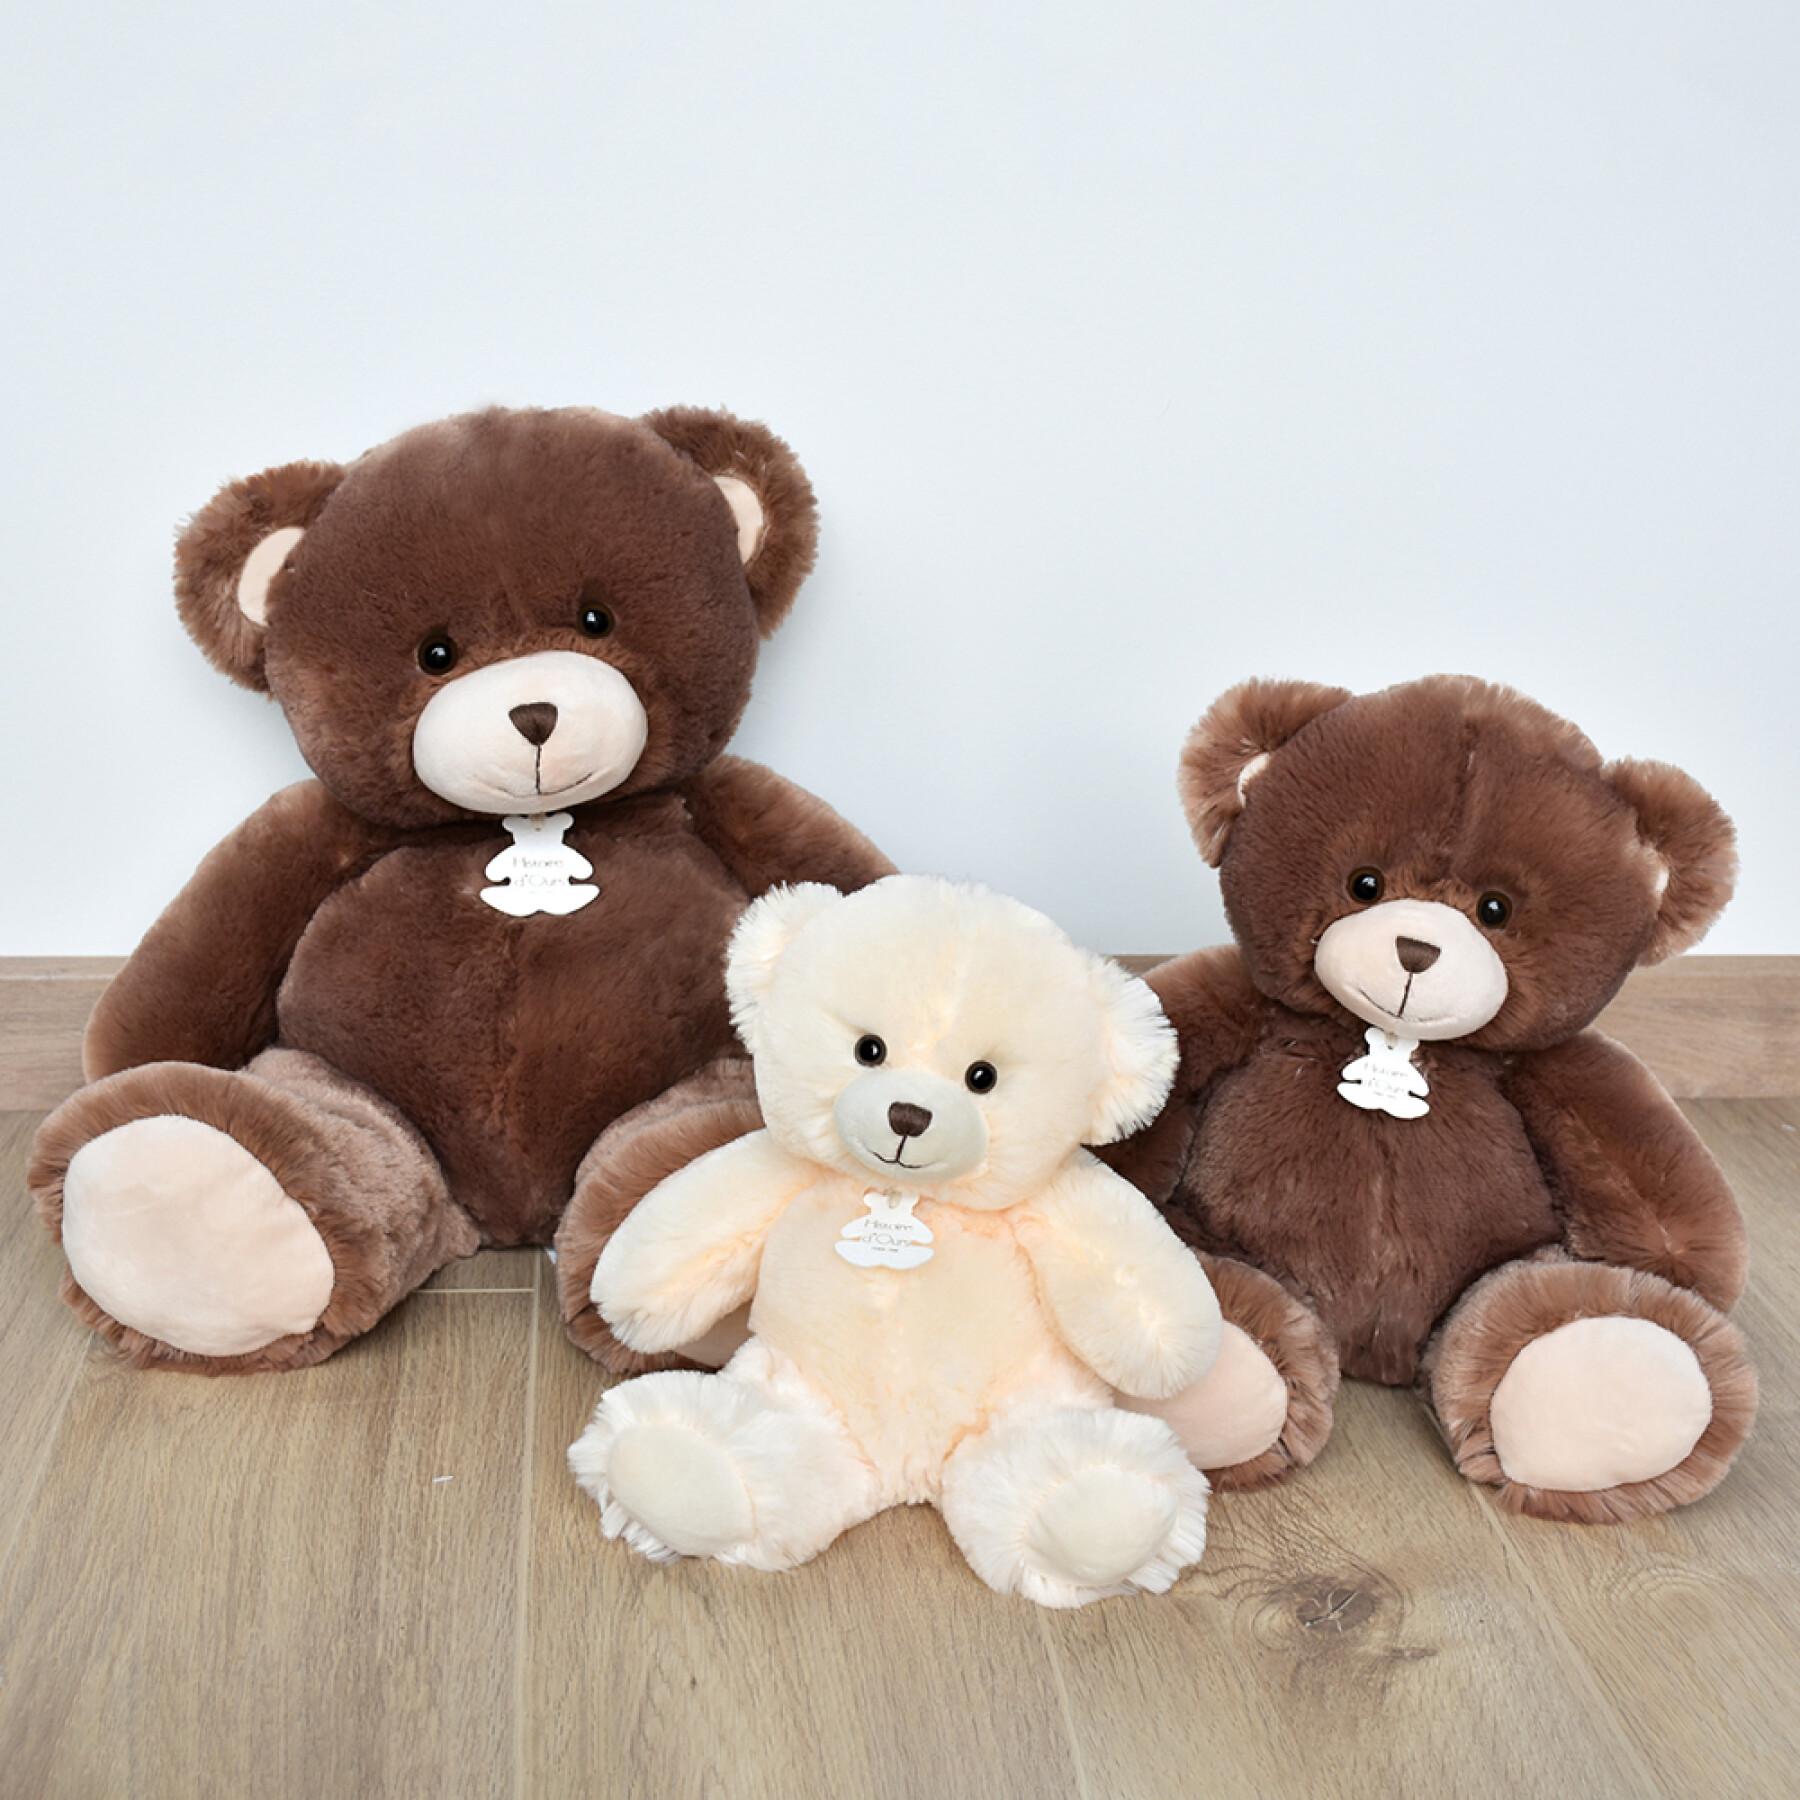 Plush Histoire d'Ours Ours Bellydou